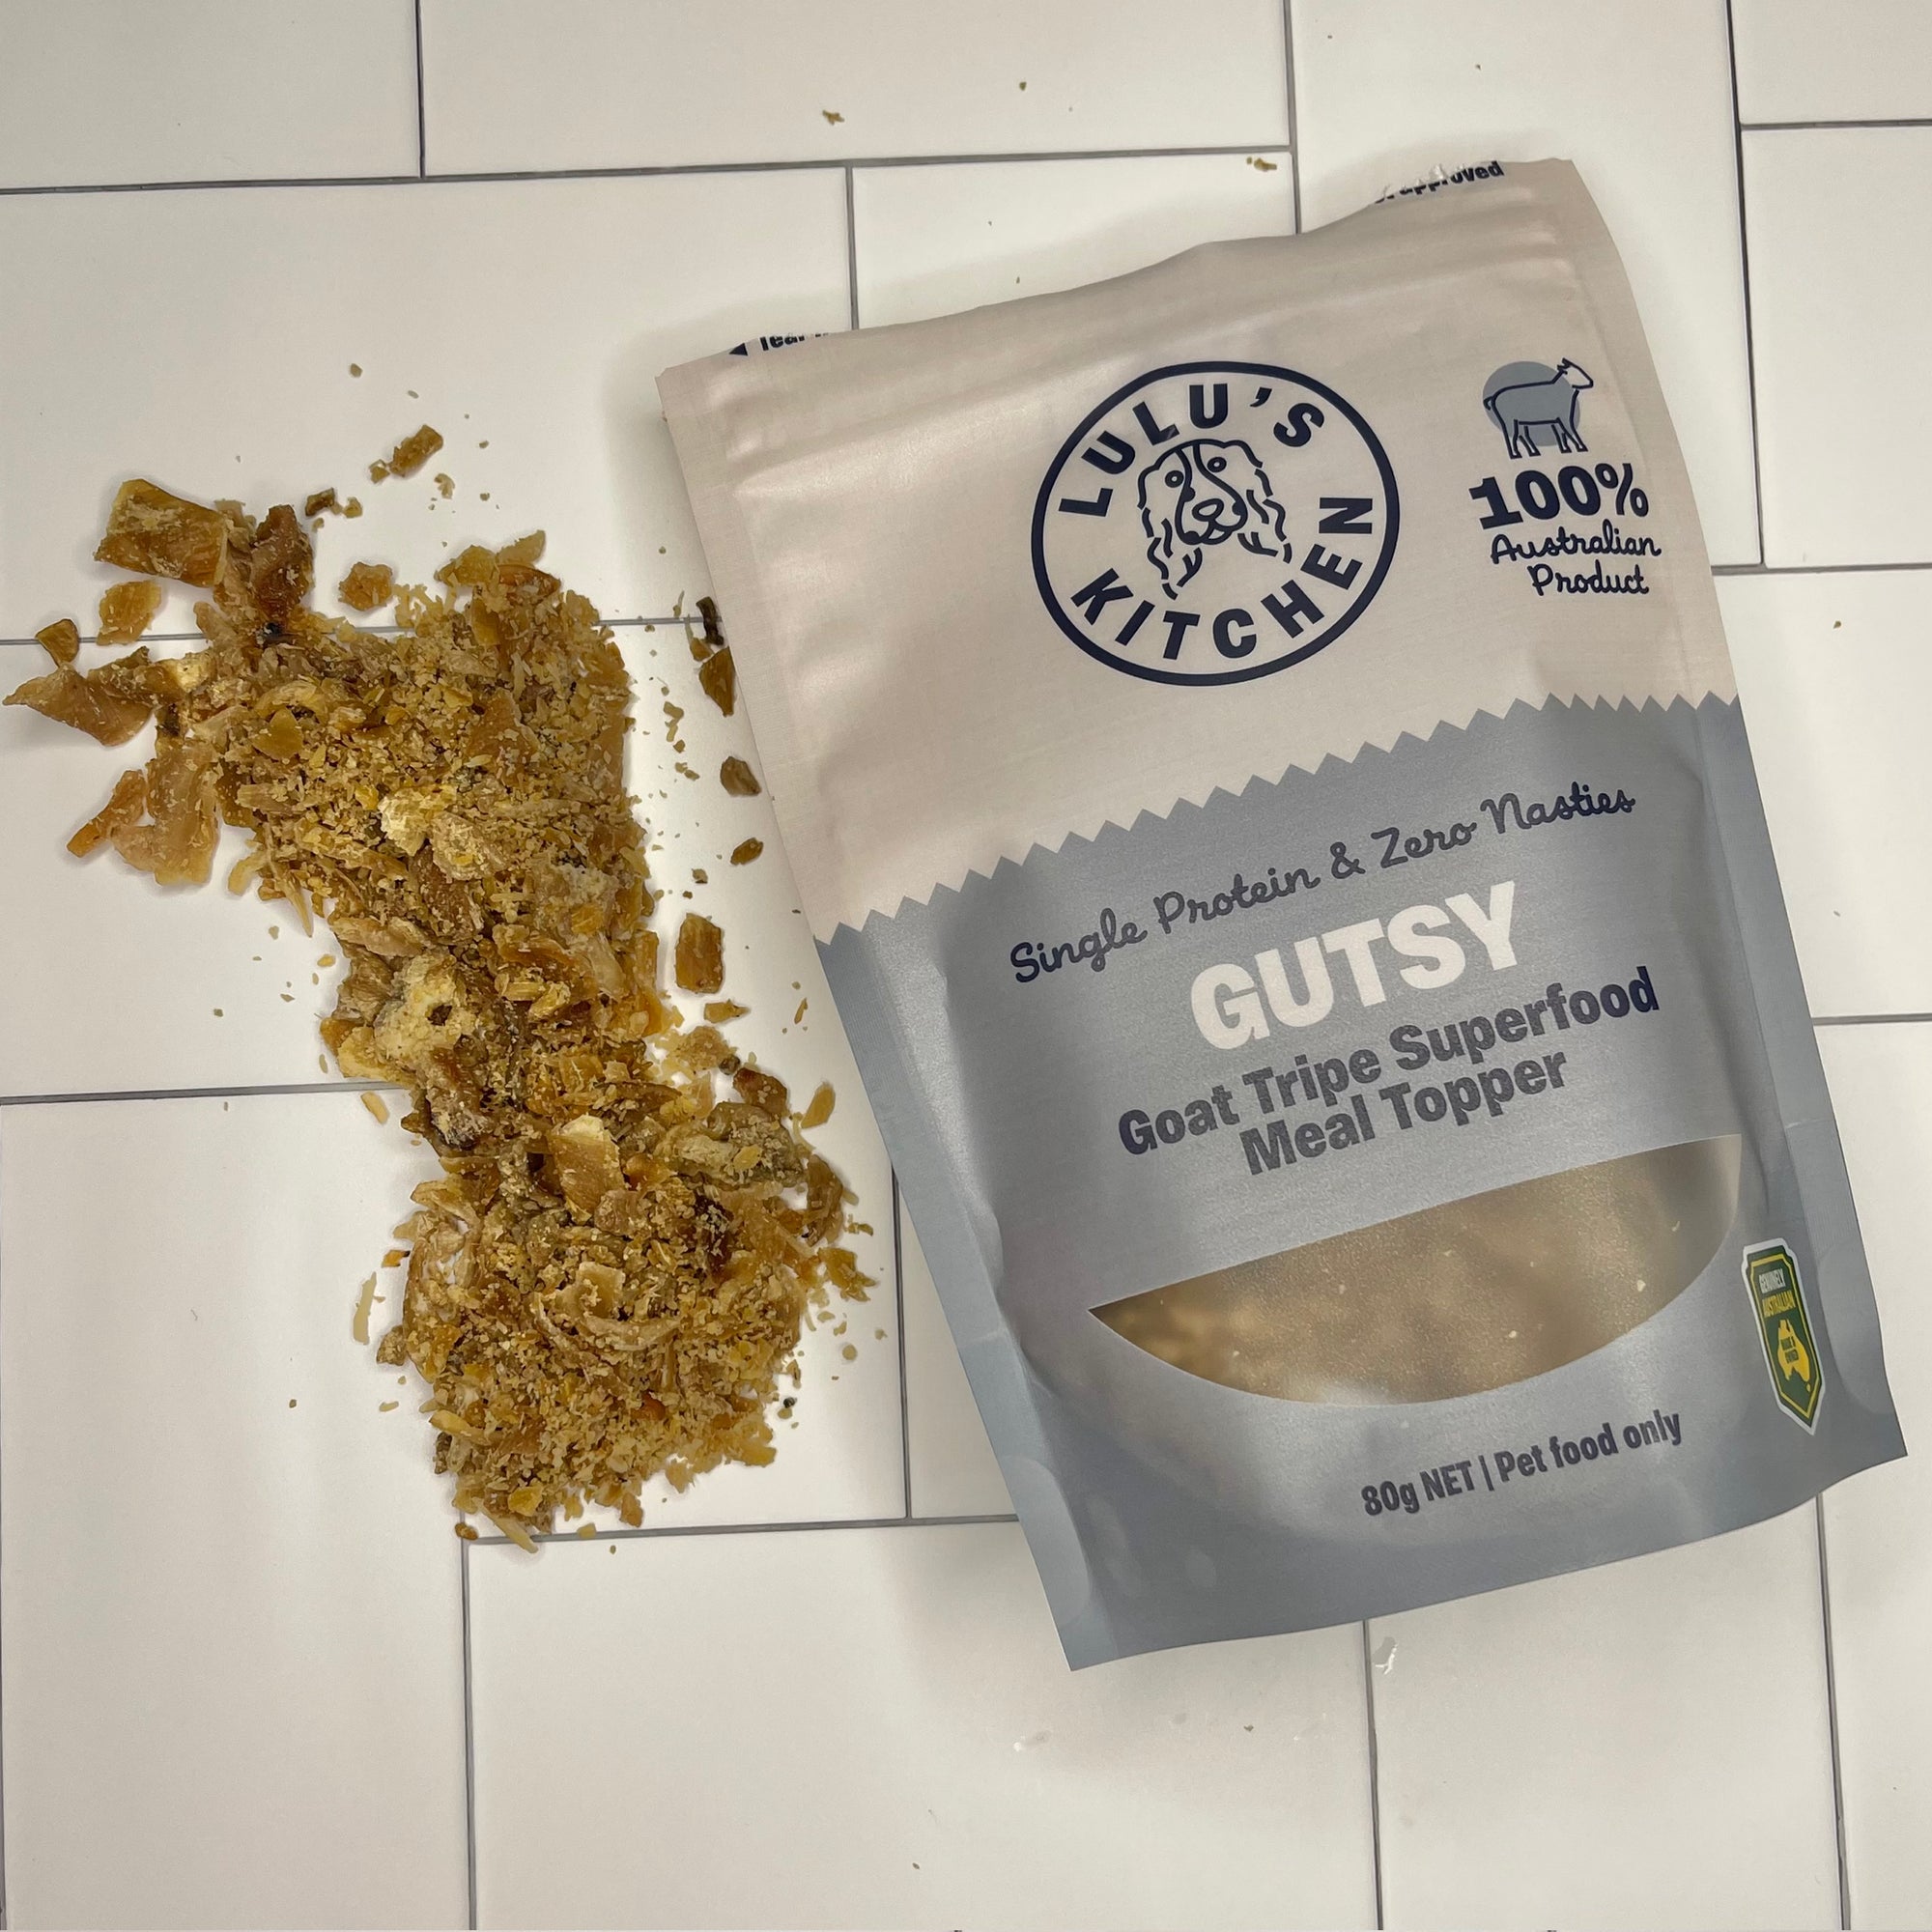 Gutsy - Goat Tripe Superfood Meal Topper